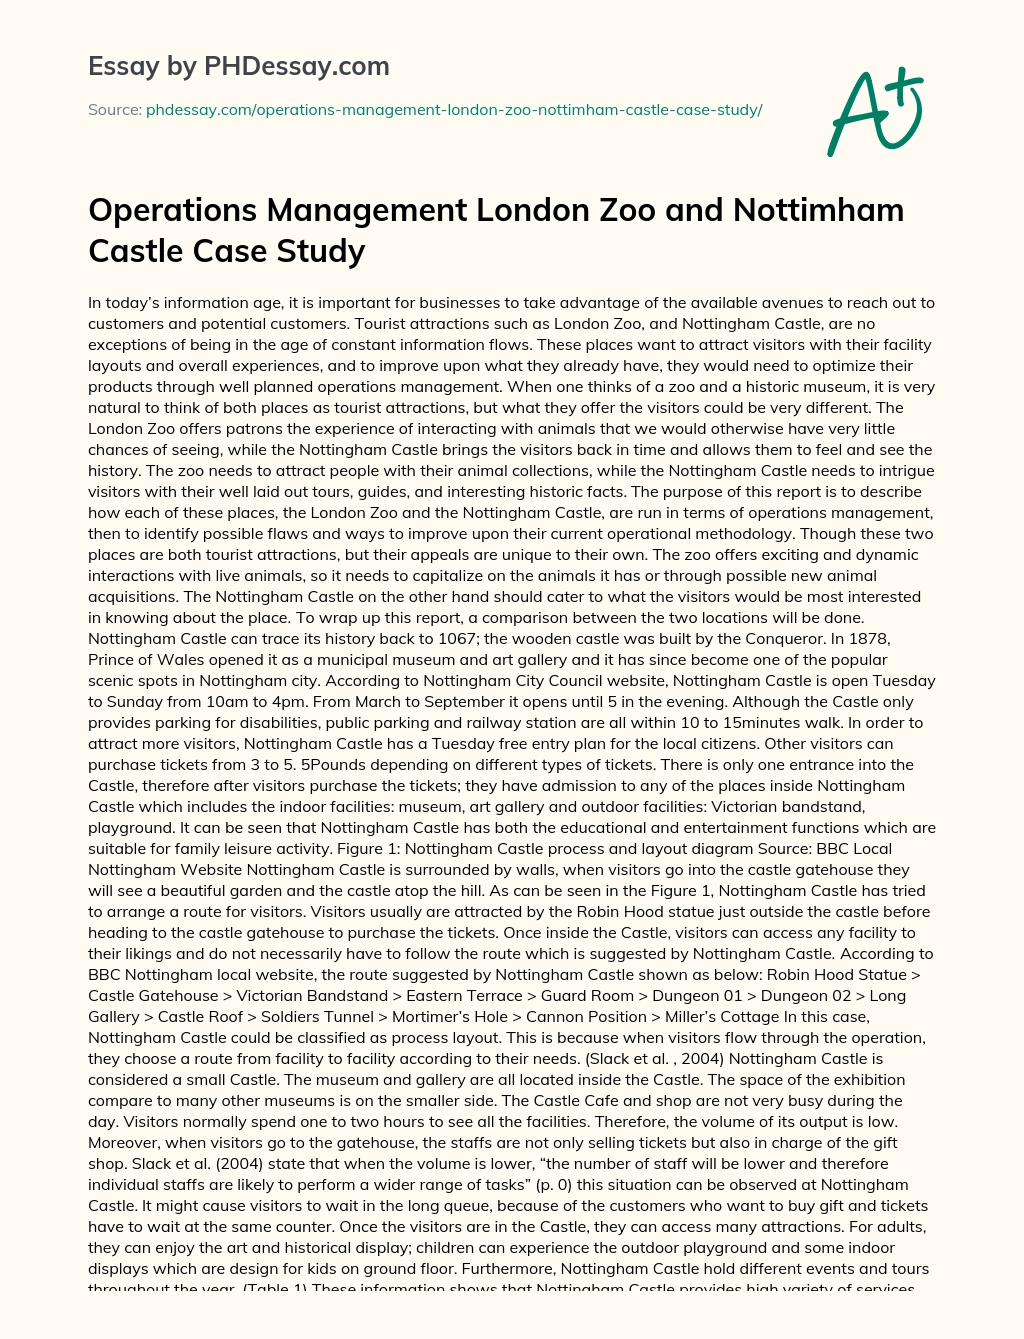 Operations Management London Zoo and Nottimham Castle Case Study essay